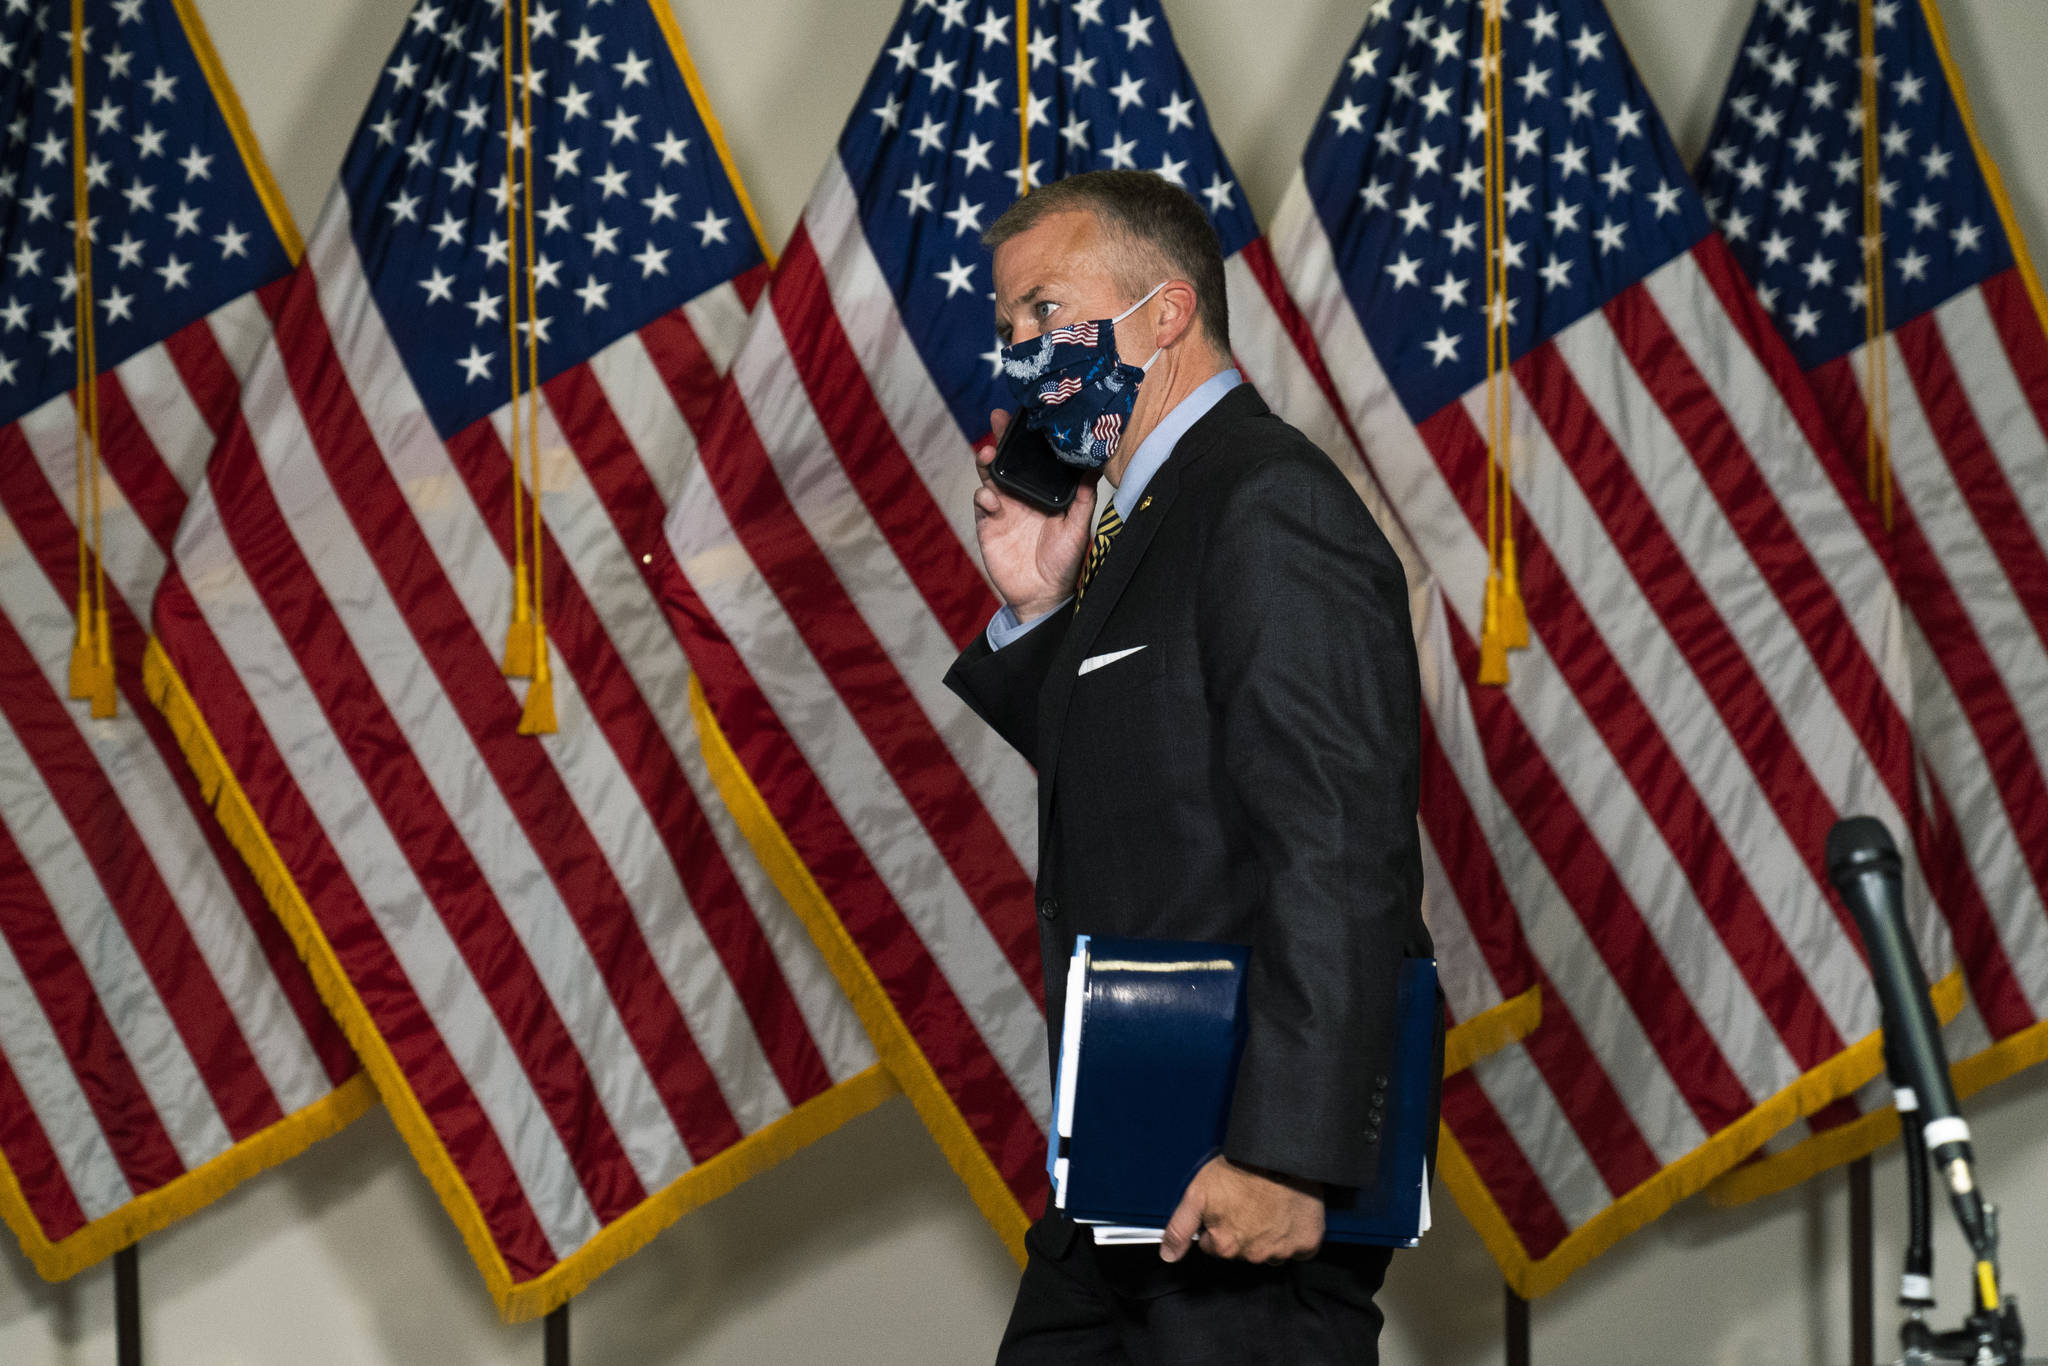 AP Photo / Manuel Balce Ceneta, File Sen. Dan Sullivan, R-Alaska, leaves a Senate Republican policy meeting on Capitol Hill in Washington. Sullivan said Tuesday, Oct. 6, 2020, he plans to vote for President Donald Trump, telling a radio program Trump and his administration “have been fully committed to helping our state.” Four years ago, after a 2005 video surfaced in which Trump made lewd comments about women, Sullivan cited the “reprehensible revelations” about Trump in withdrawing his support of Trump’s candidacy.